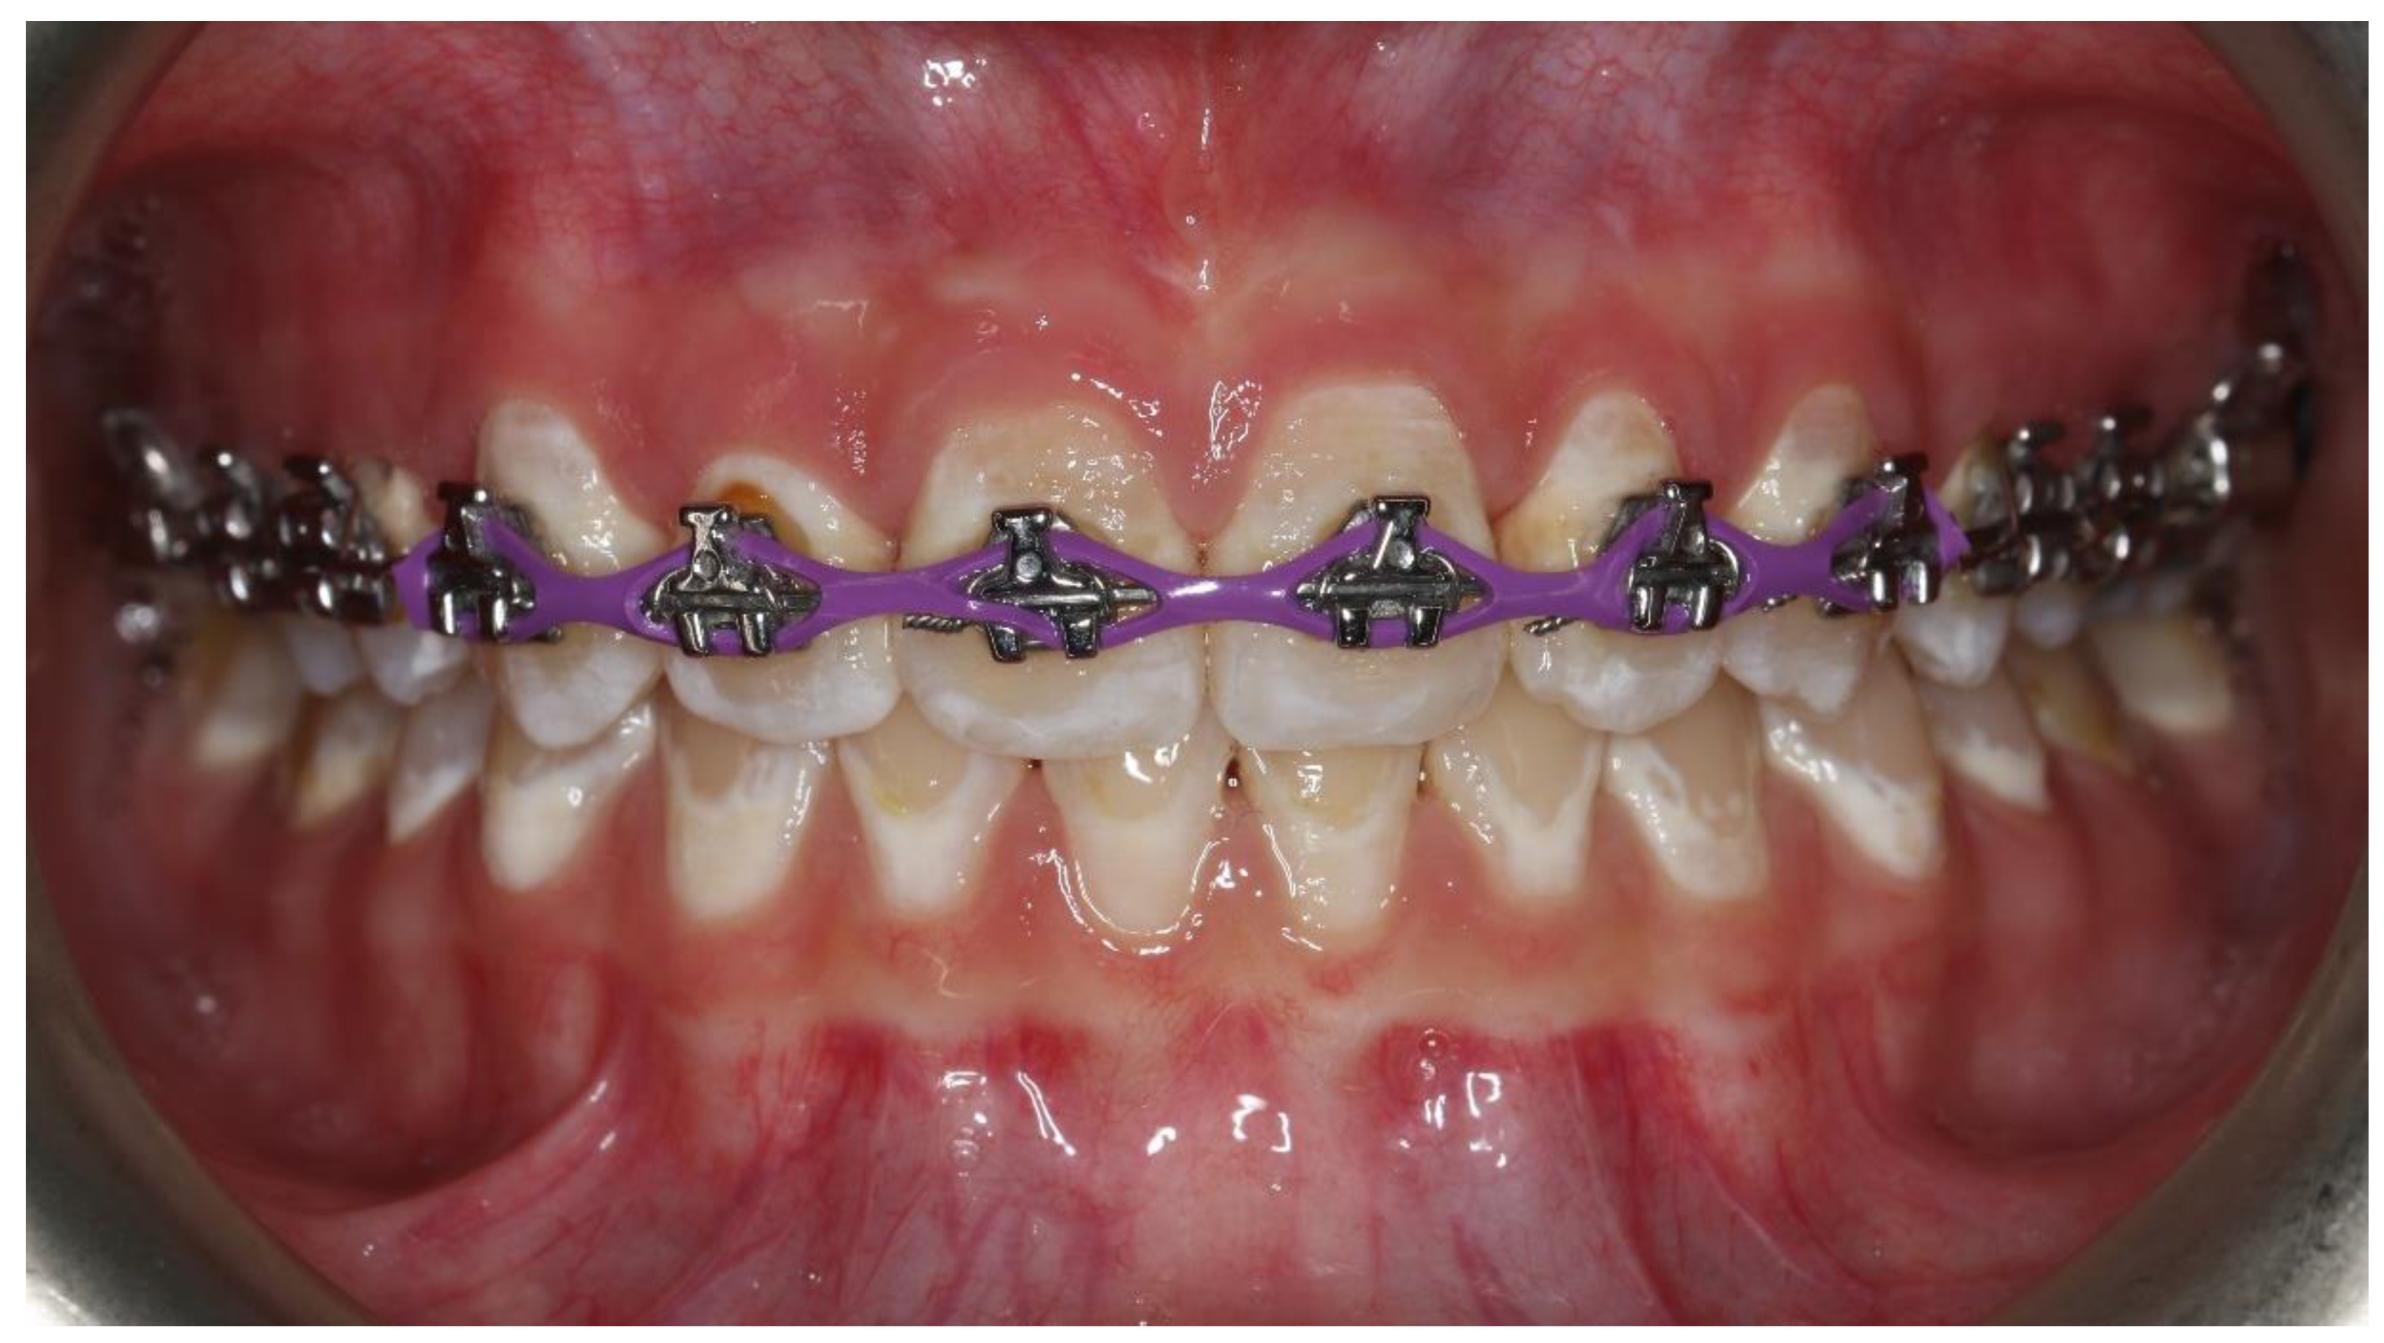 Can You Reuse Rubber Bands for Braces? ANSWERED - Eco Friendly-HQ